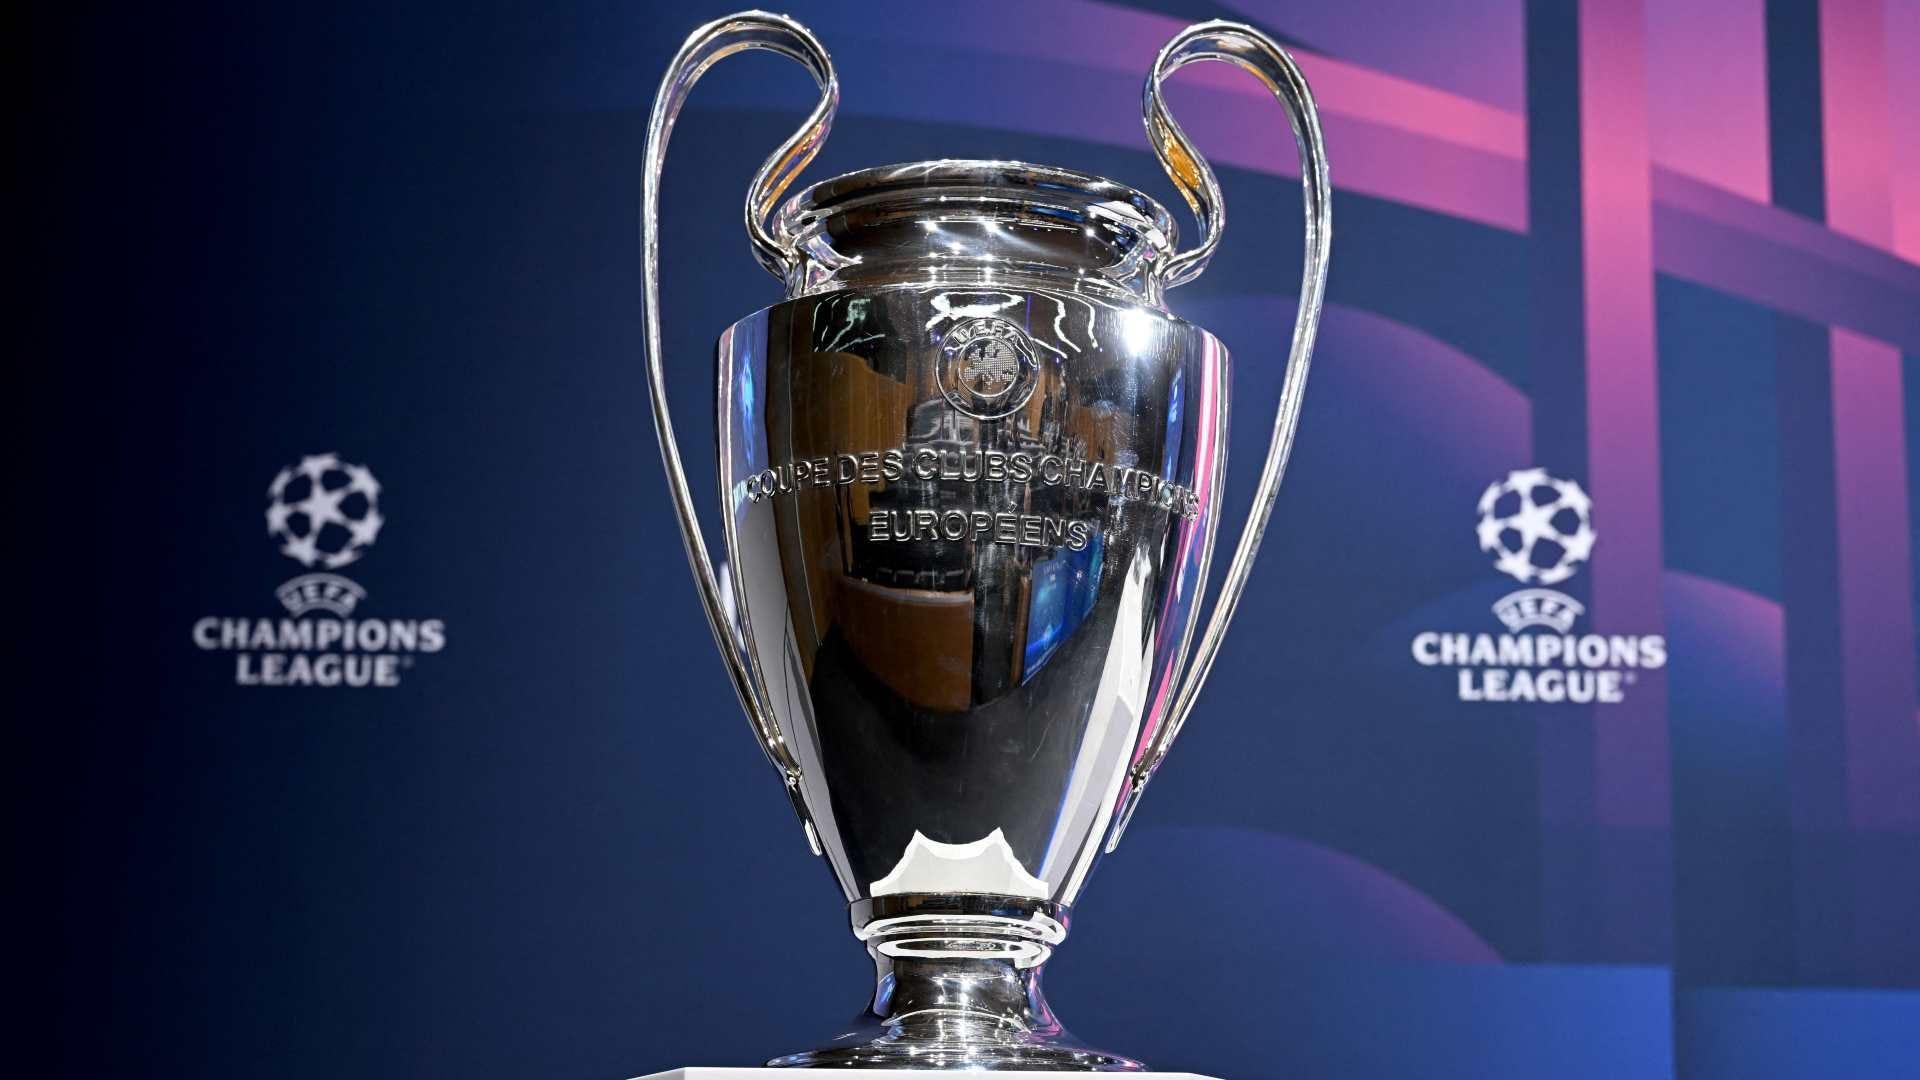 UCL SEMI-FINALS: FOUR TEAMS, TWO MATCHES, ONE DREAM